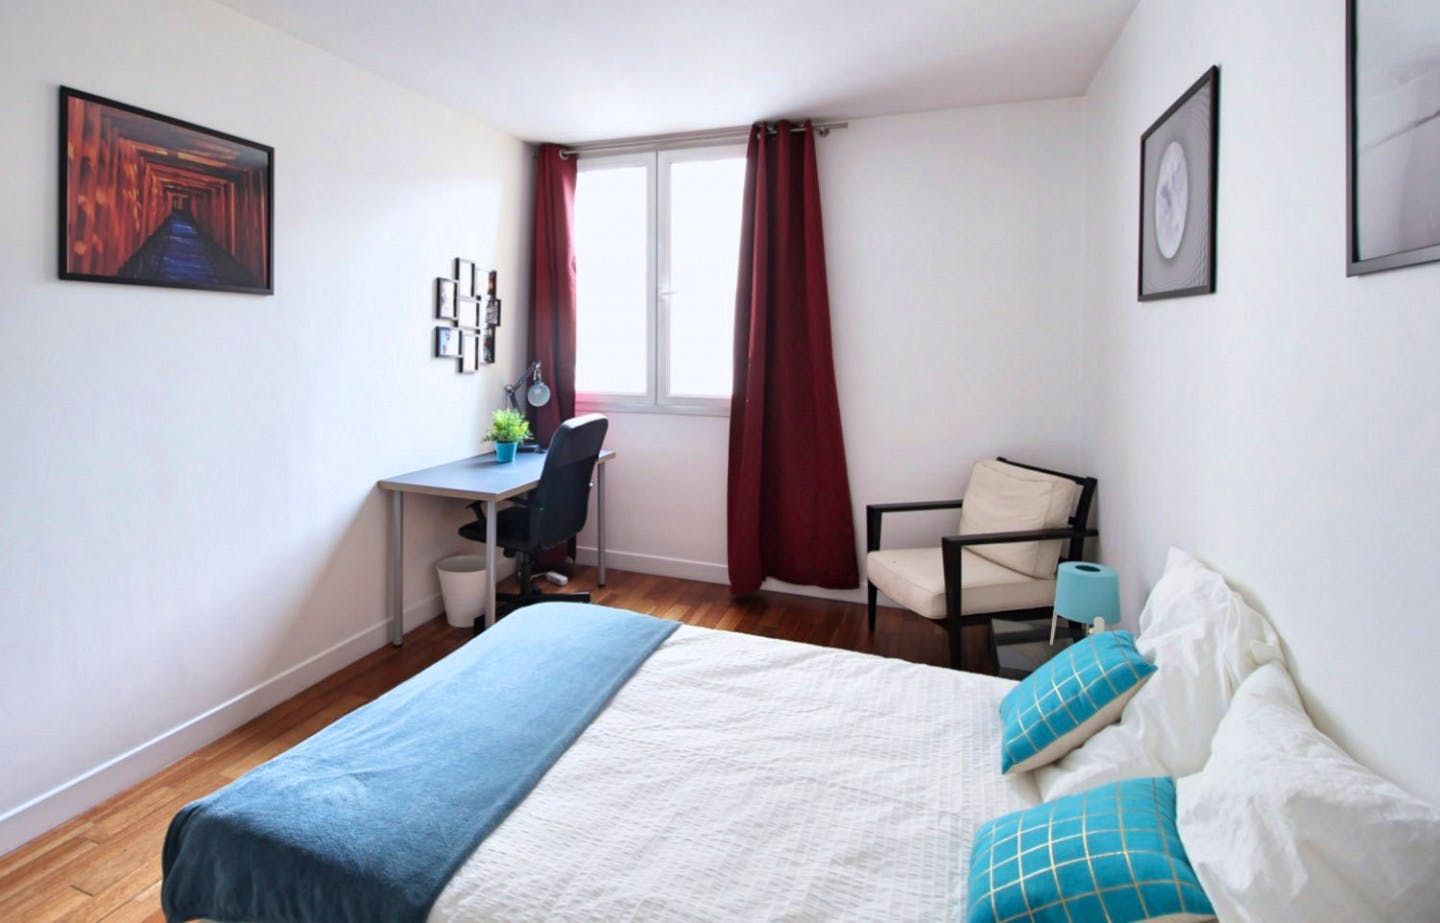 Bright and well appointed apartment located near the Sacré Cœur